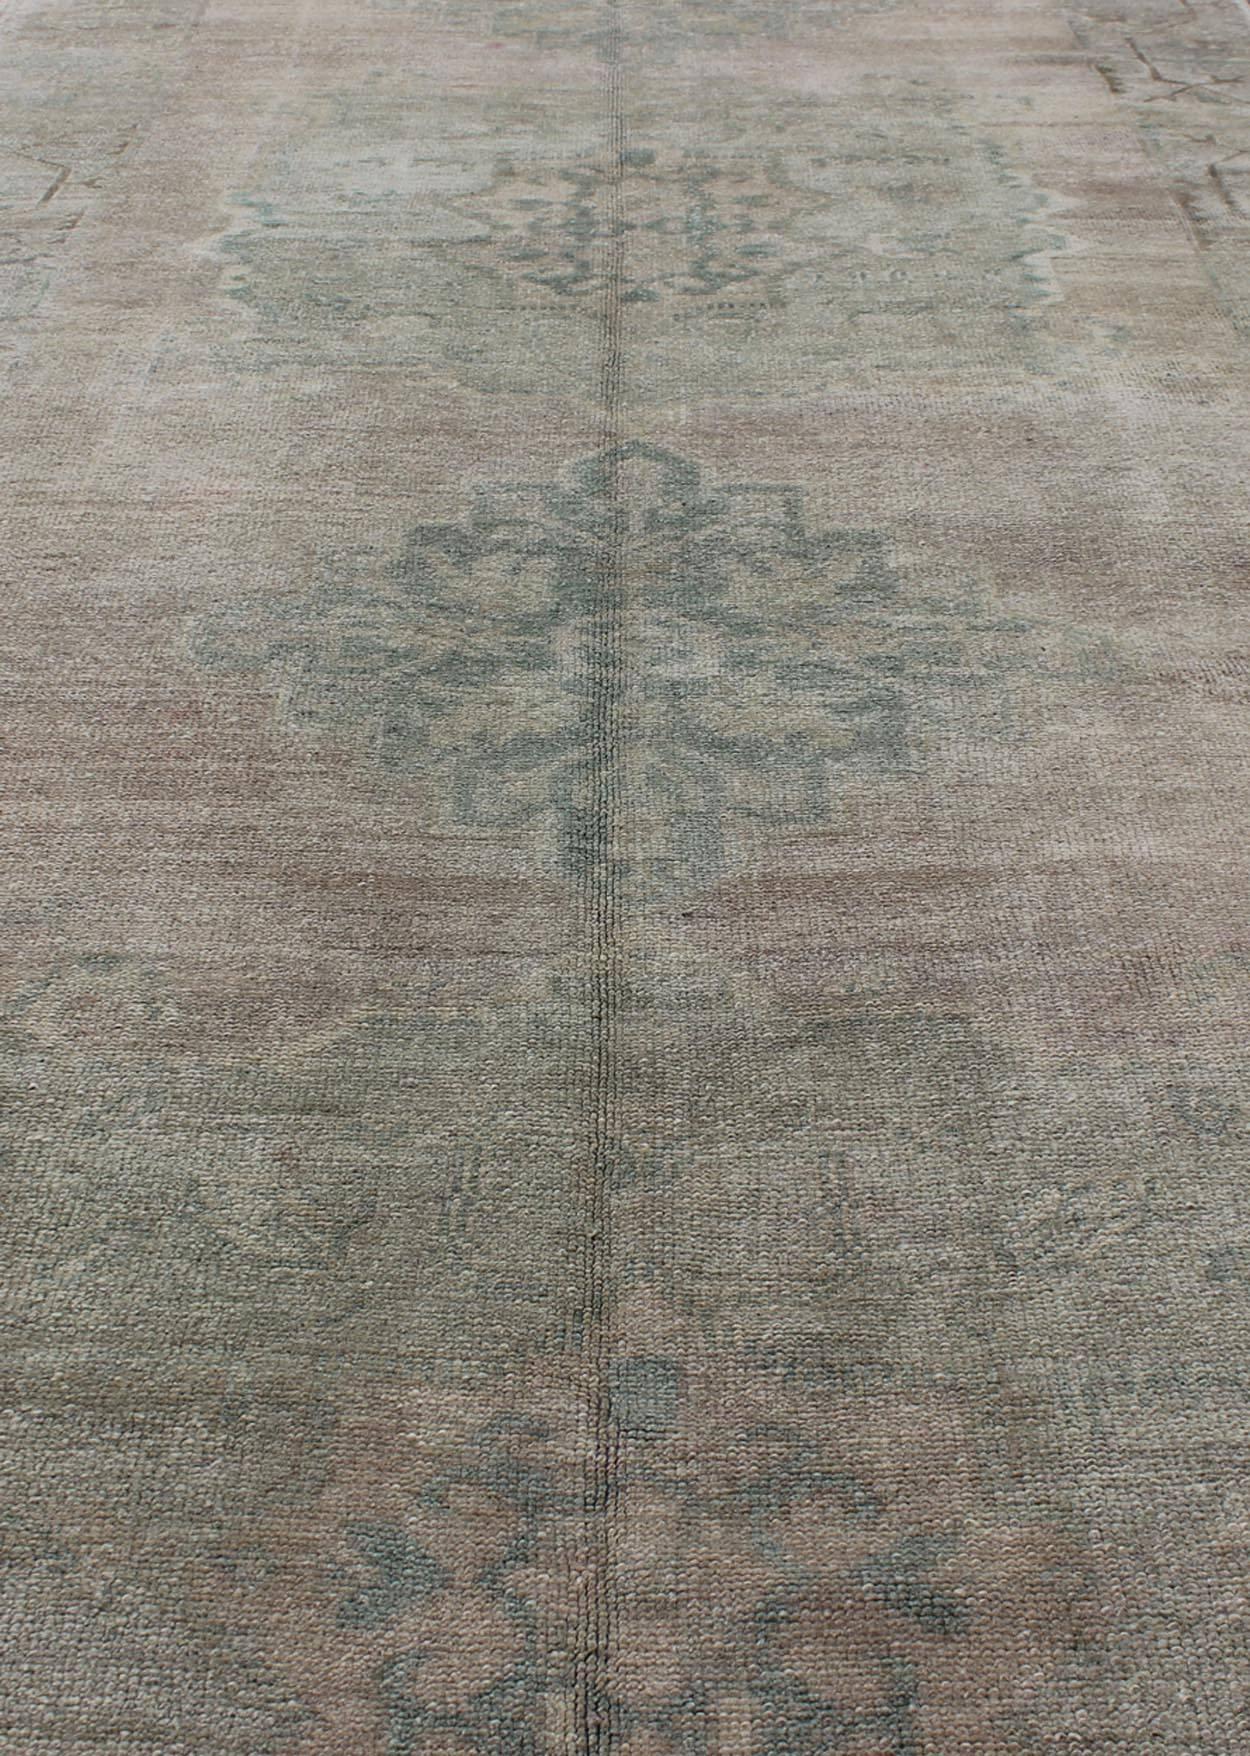 Wool Faded Vintage Turkish Oushak Runner with Dual-Medallion in Lavender and Green For Sale